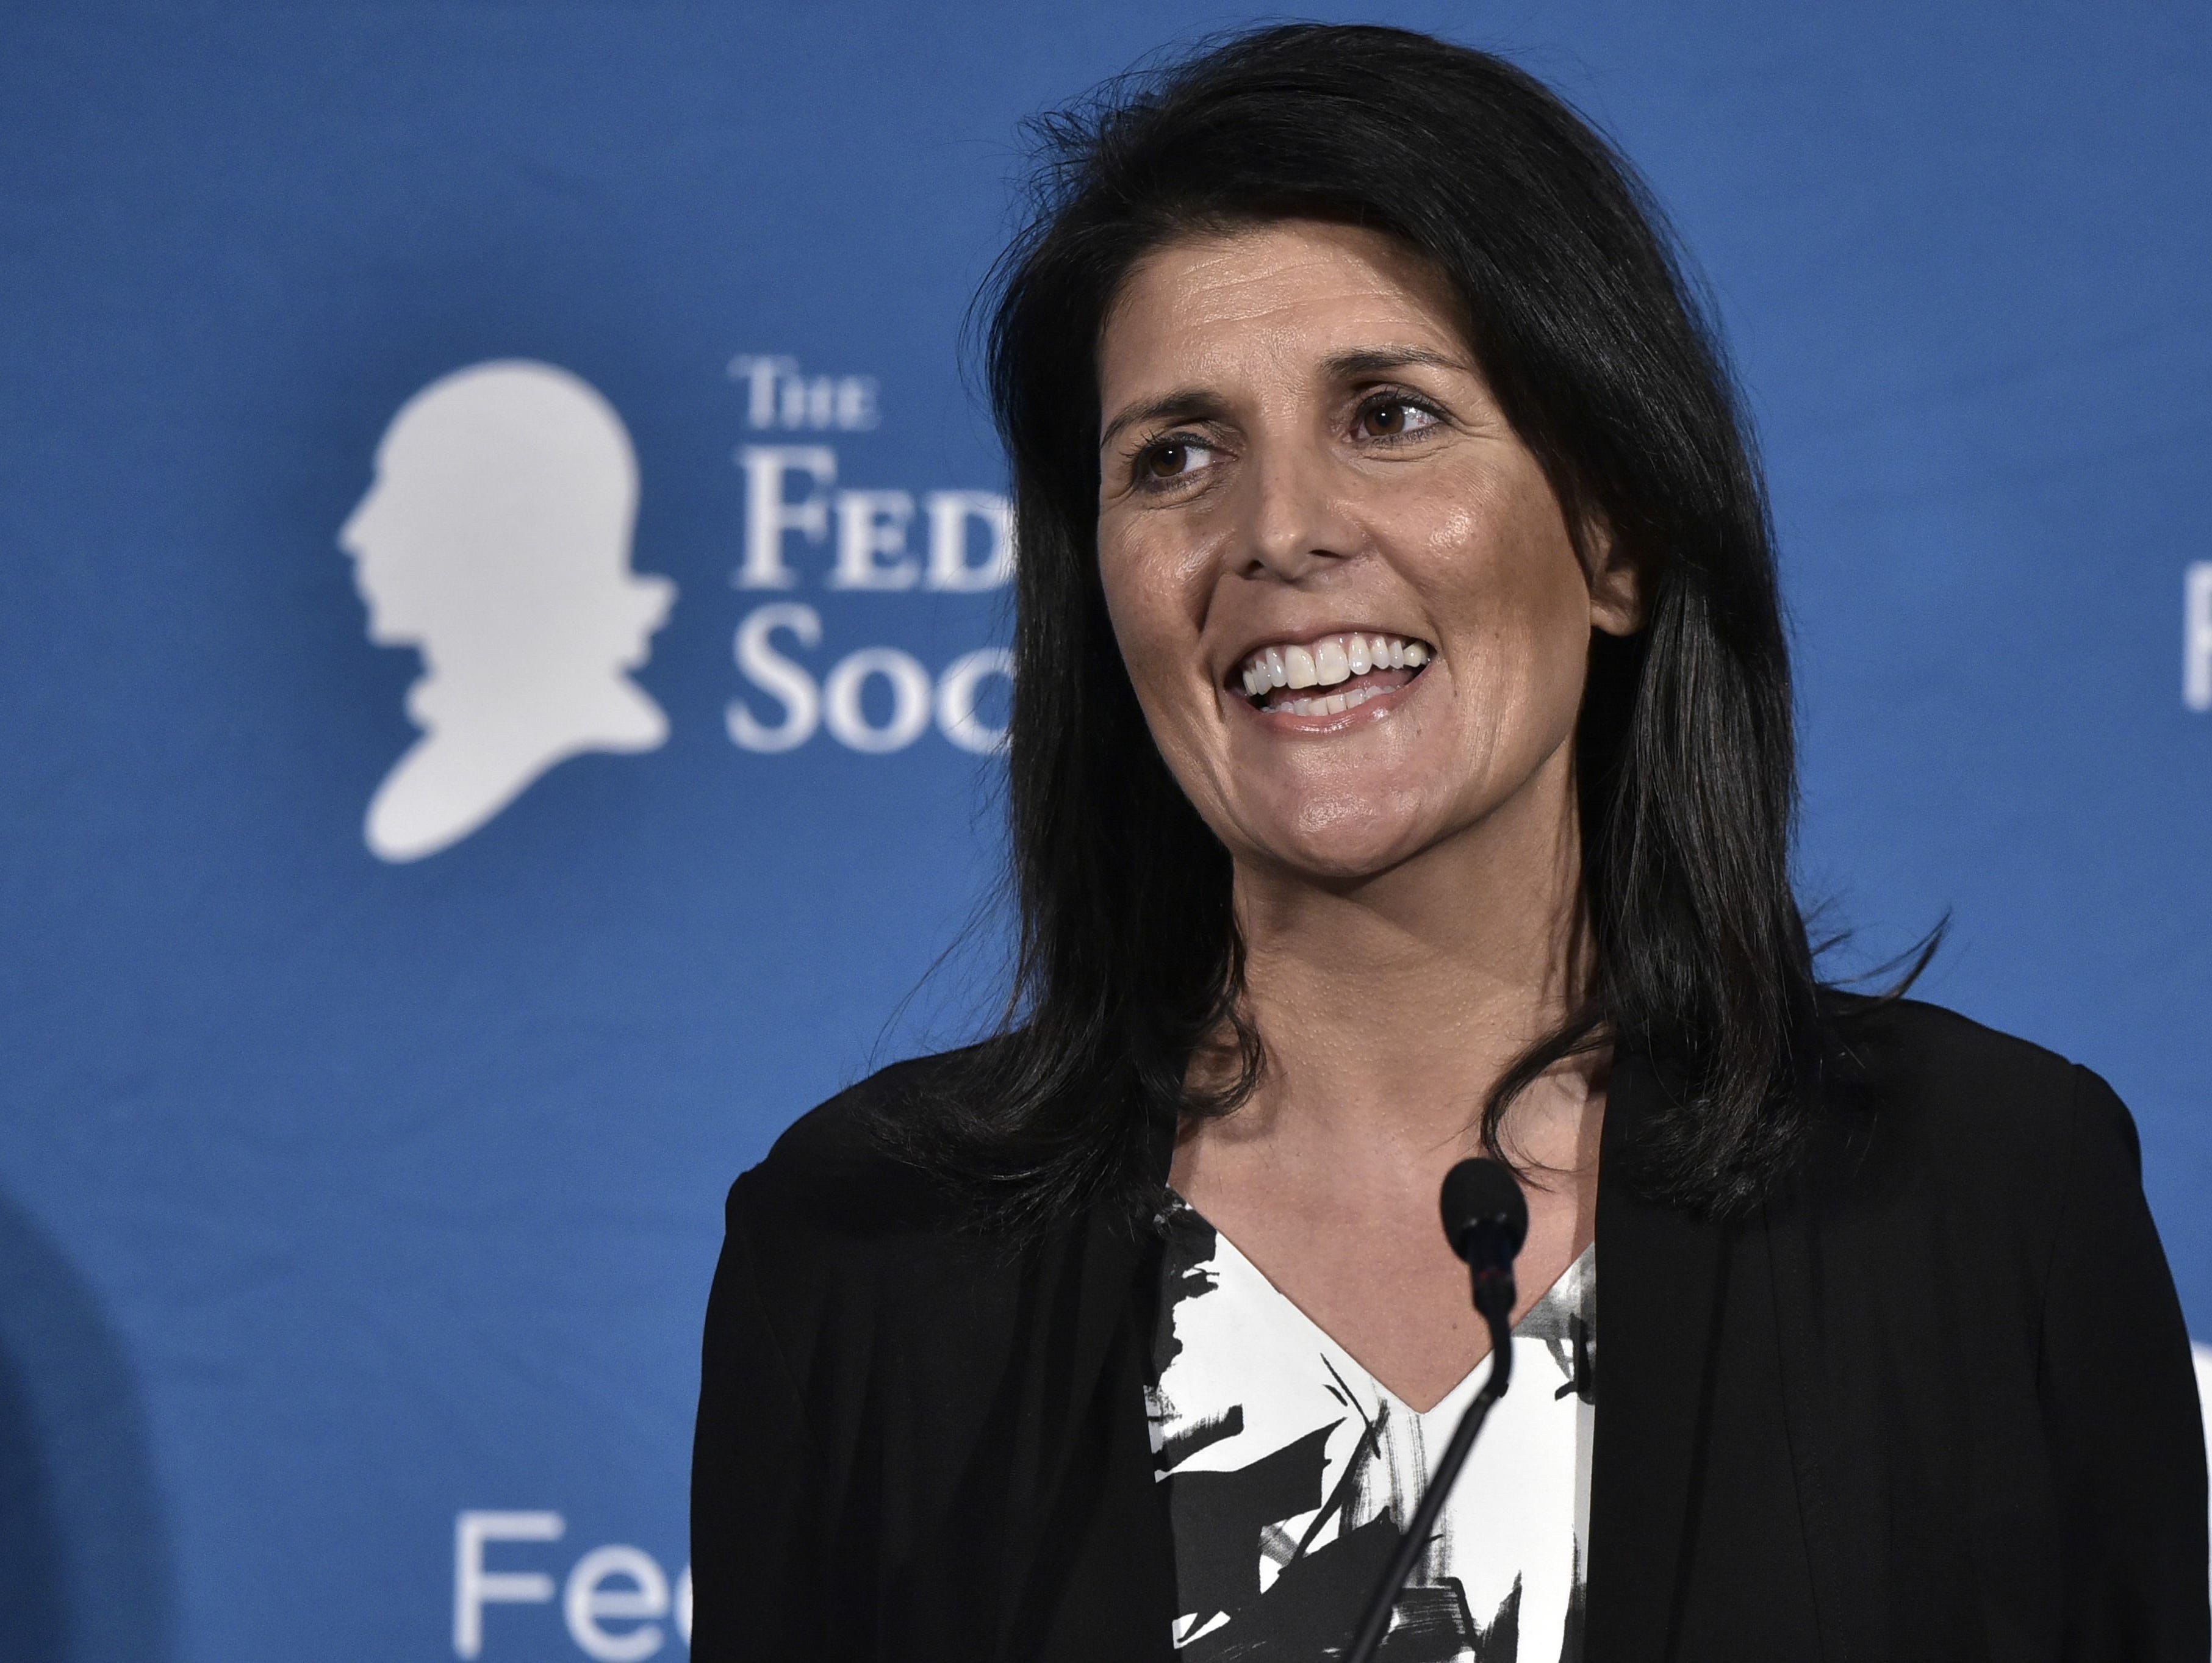 South Carolina Gov. Nikki Haley speaks during the 2016 National Lawyers Convention sponsored by the Federalist Society in Washington, D.C. on Nov. 18, 2016.